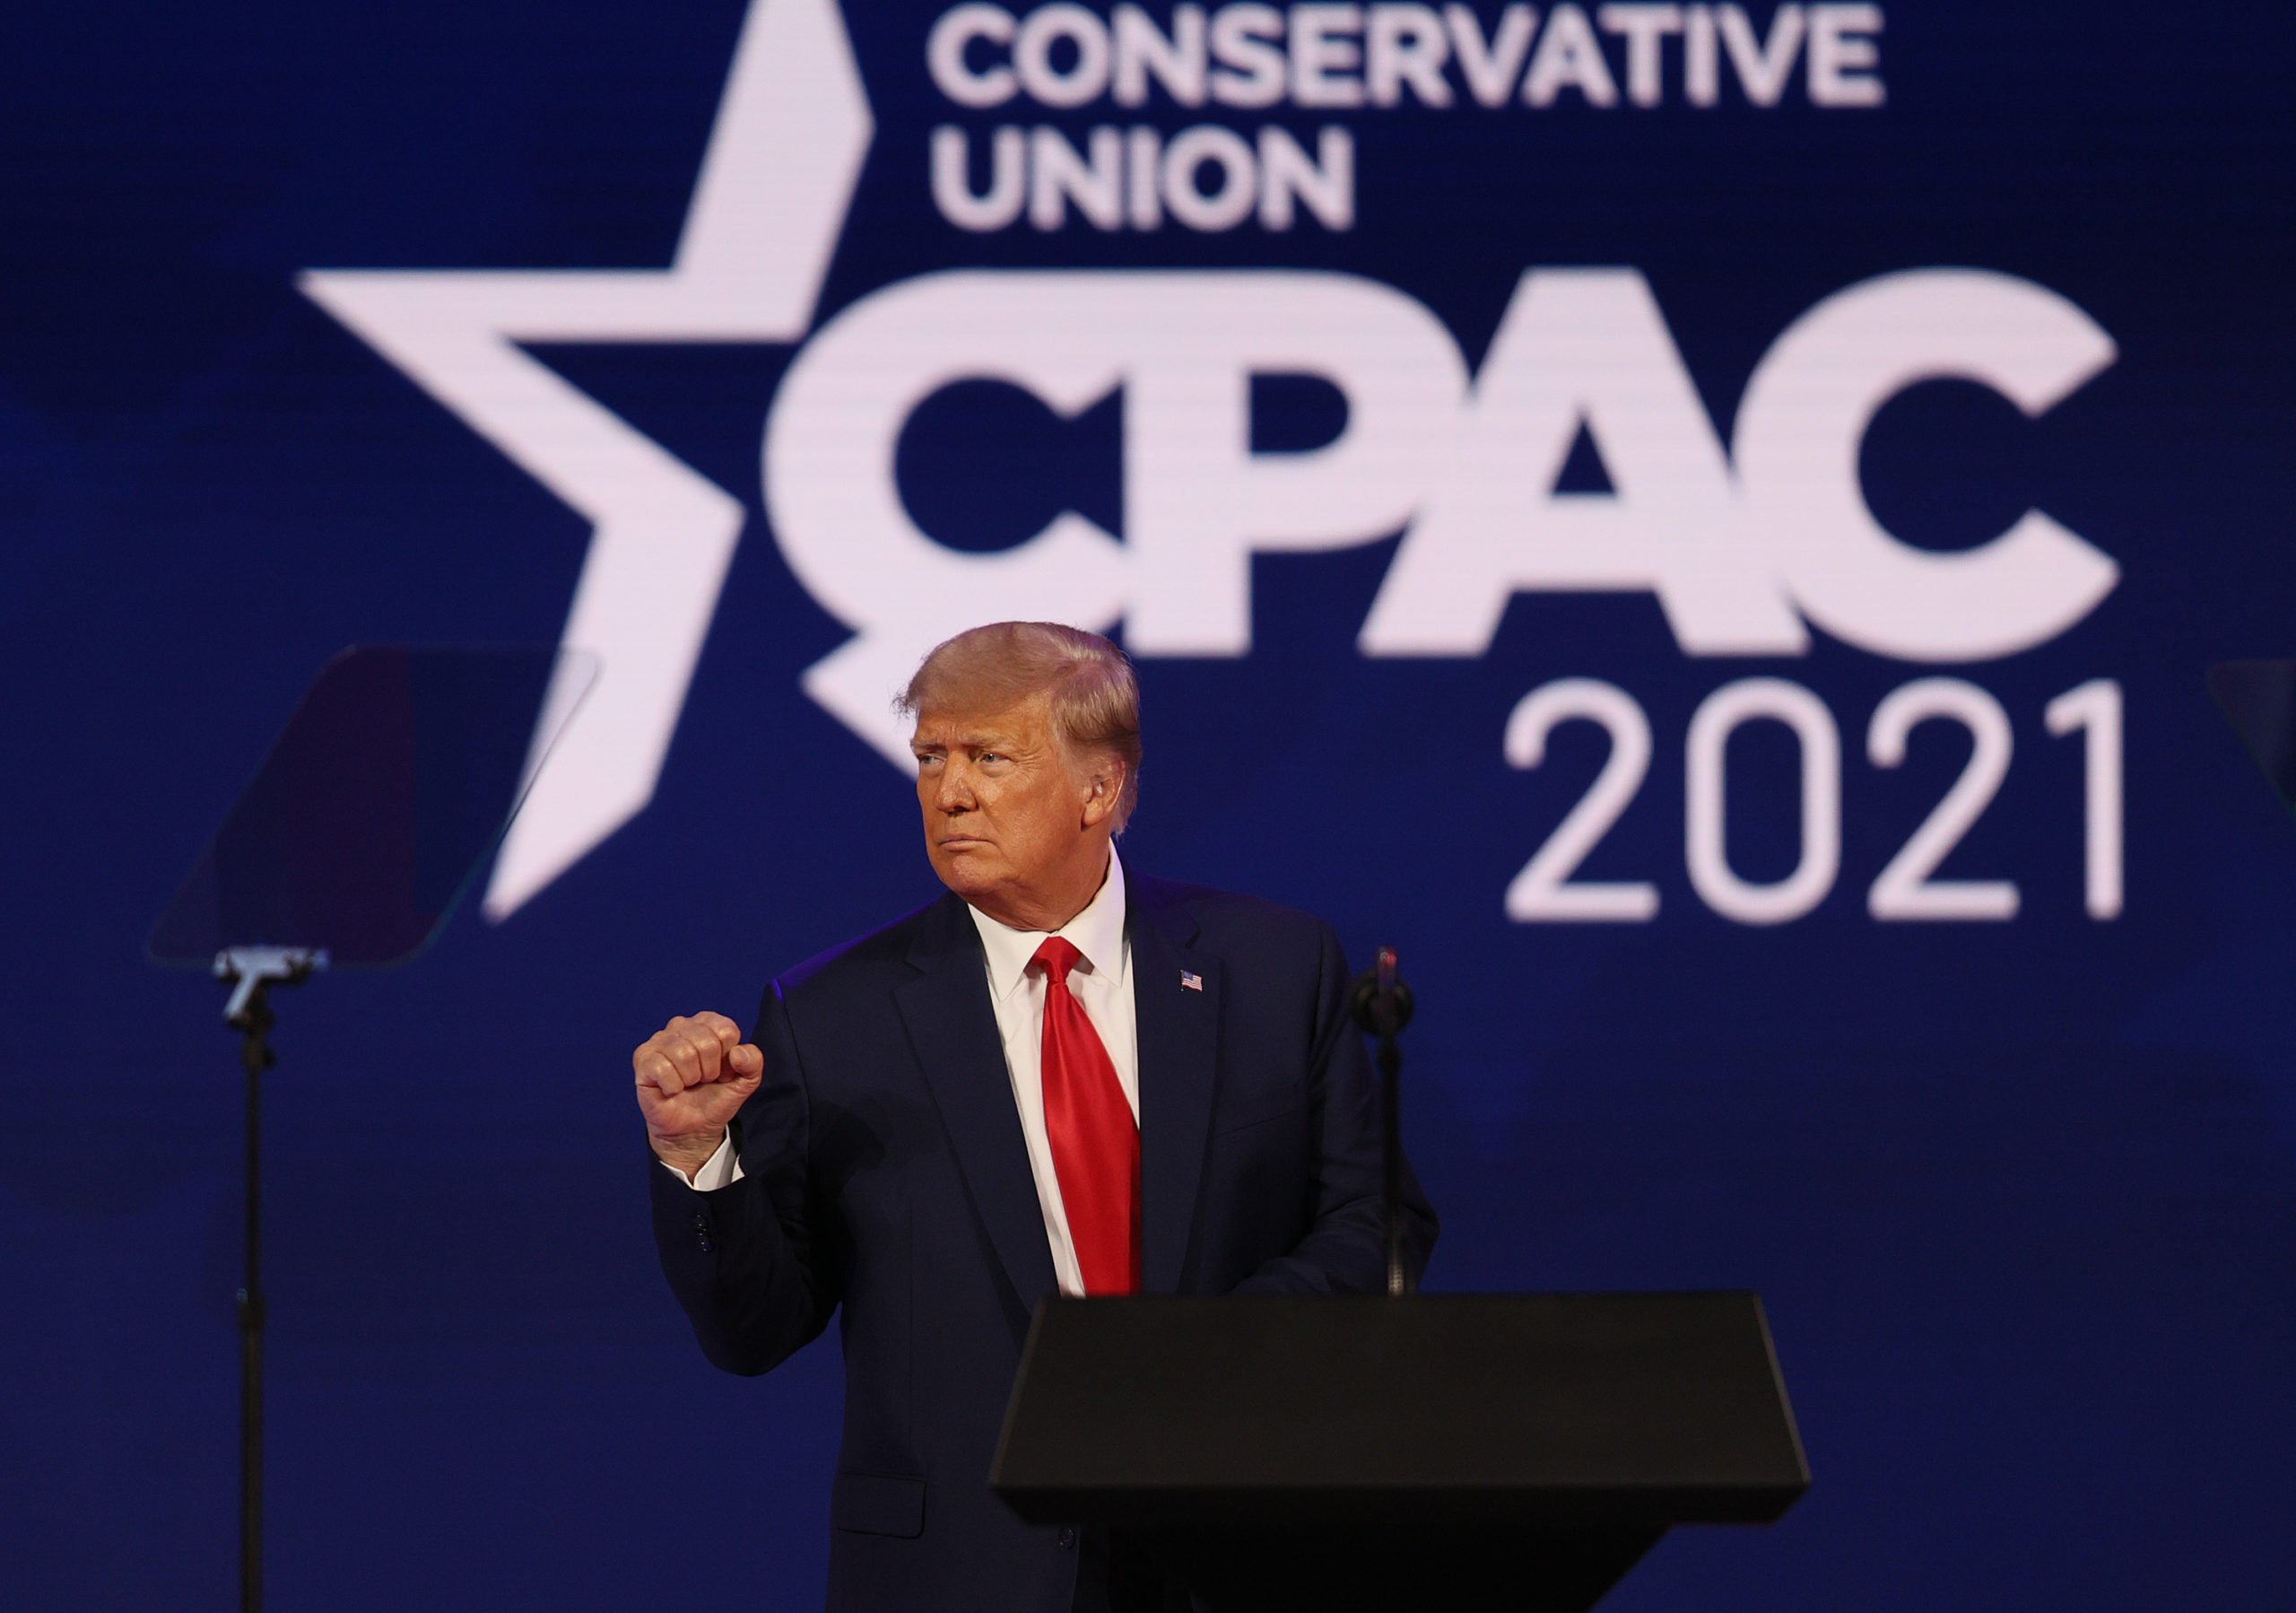 Former President Donald Trump addresses the Conservative Political Action Conference held in the Hyatt Regency on February 28, 2021 in Orlando, Florida. (Joe Raedle/Getty Images)